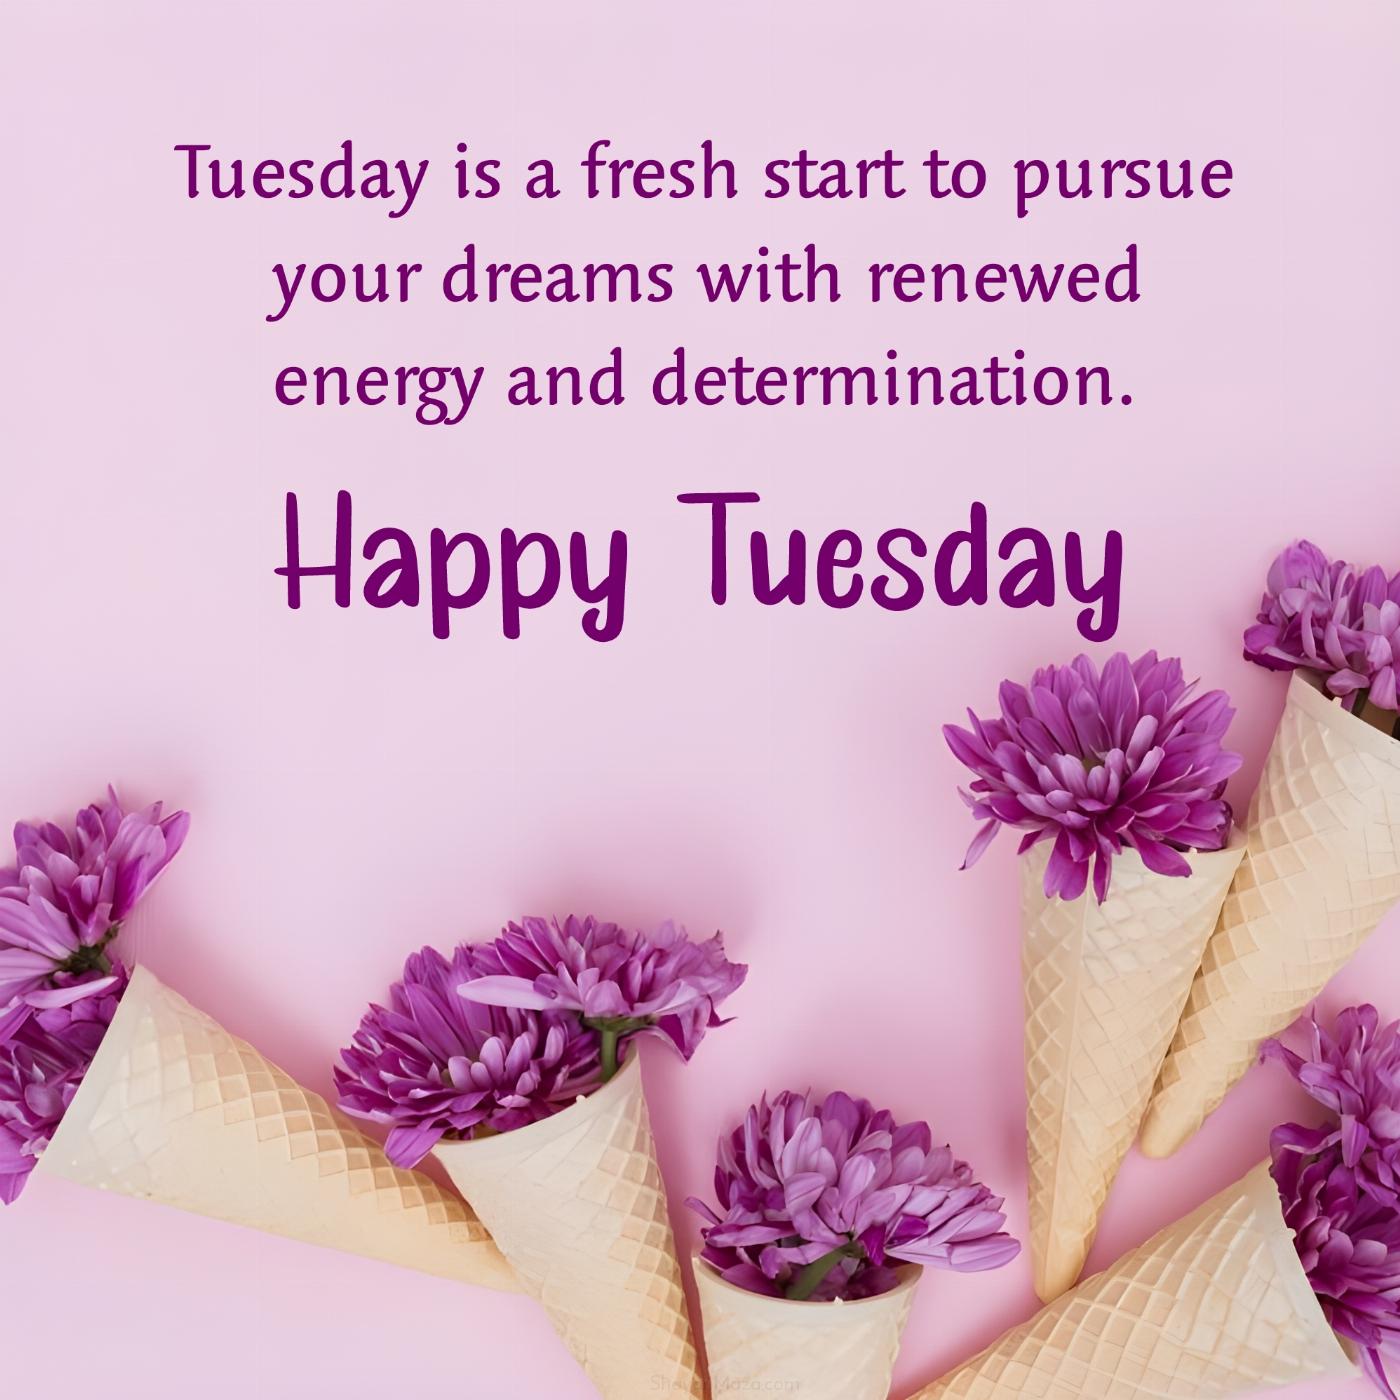 Tuesday is a fresh start to pursue your dreams with renewed energy